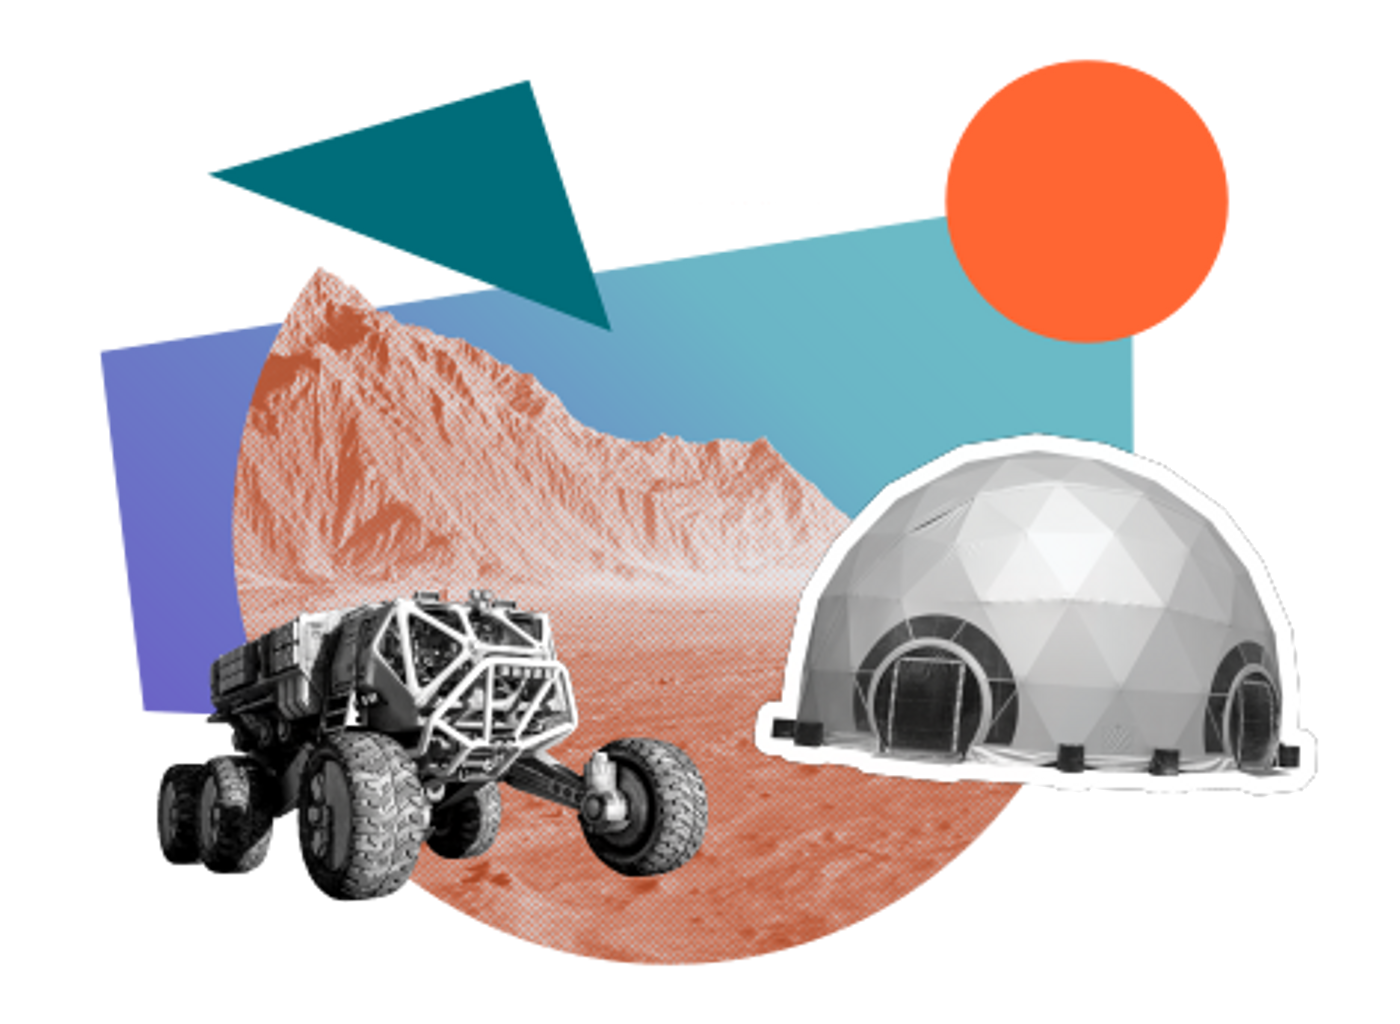 A Mars rover and a space base surrounded by colourful shapes